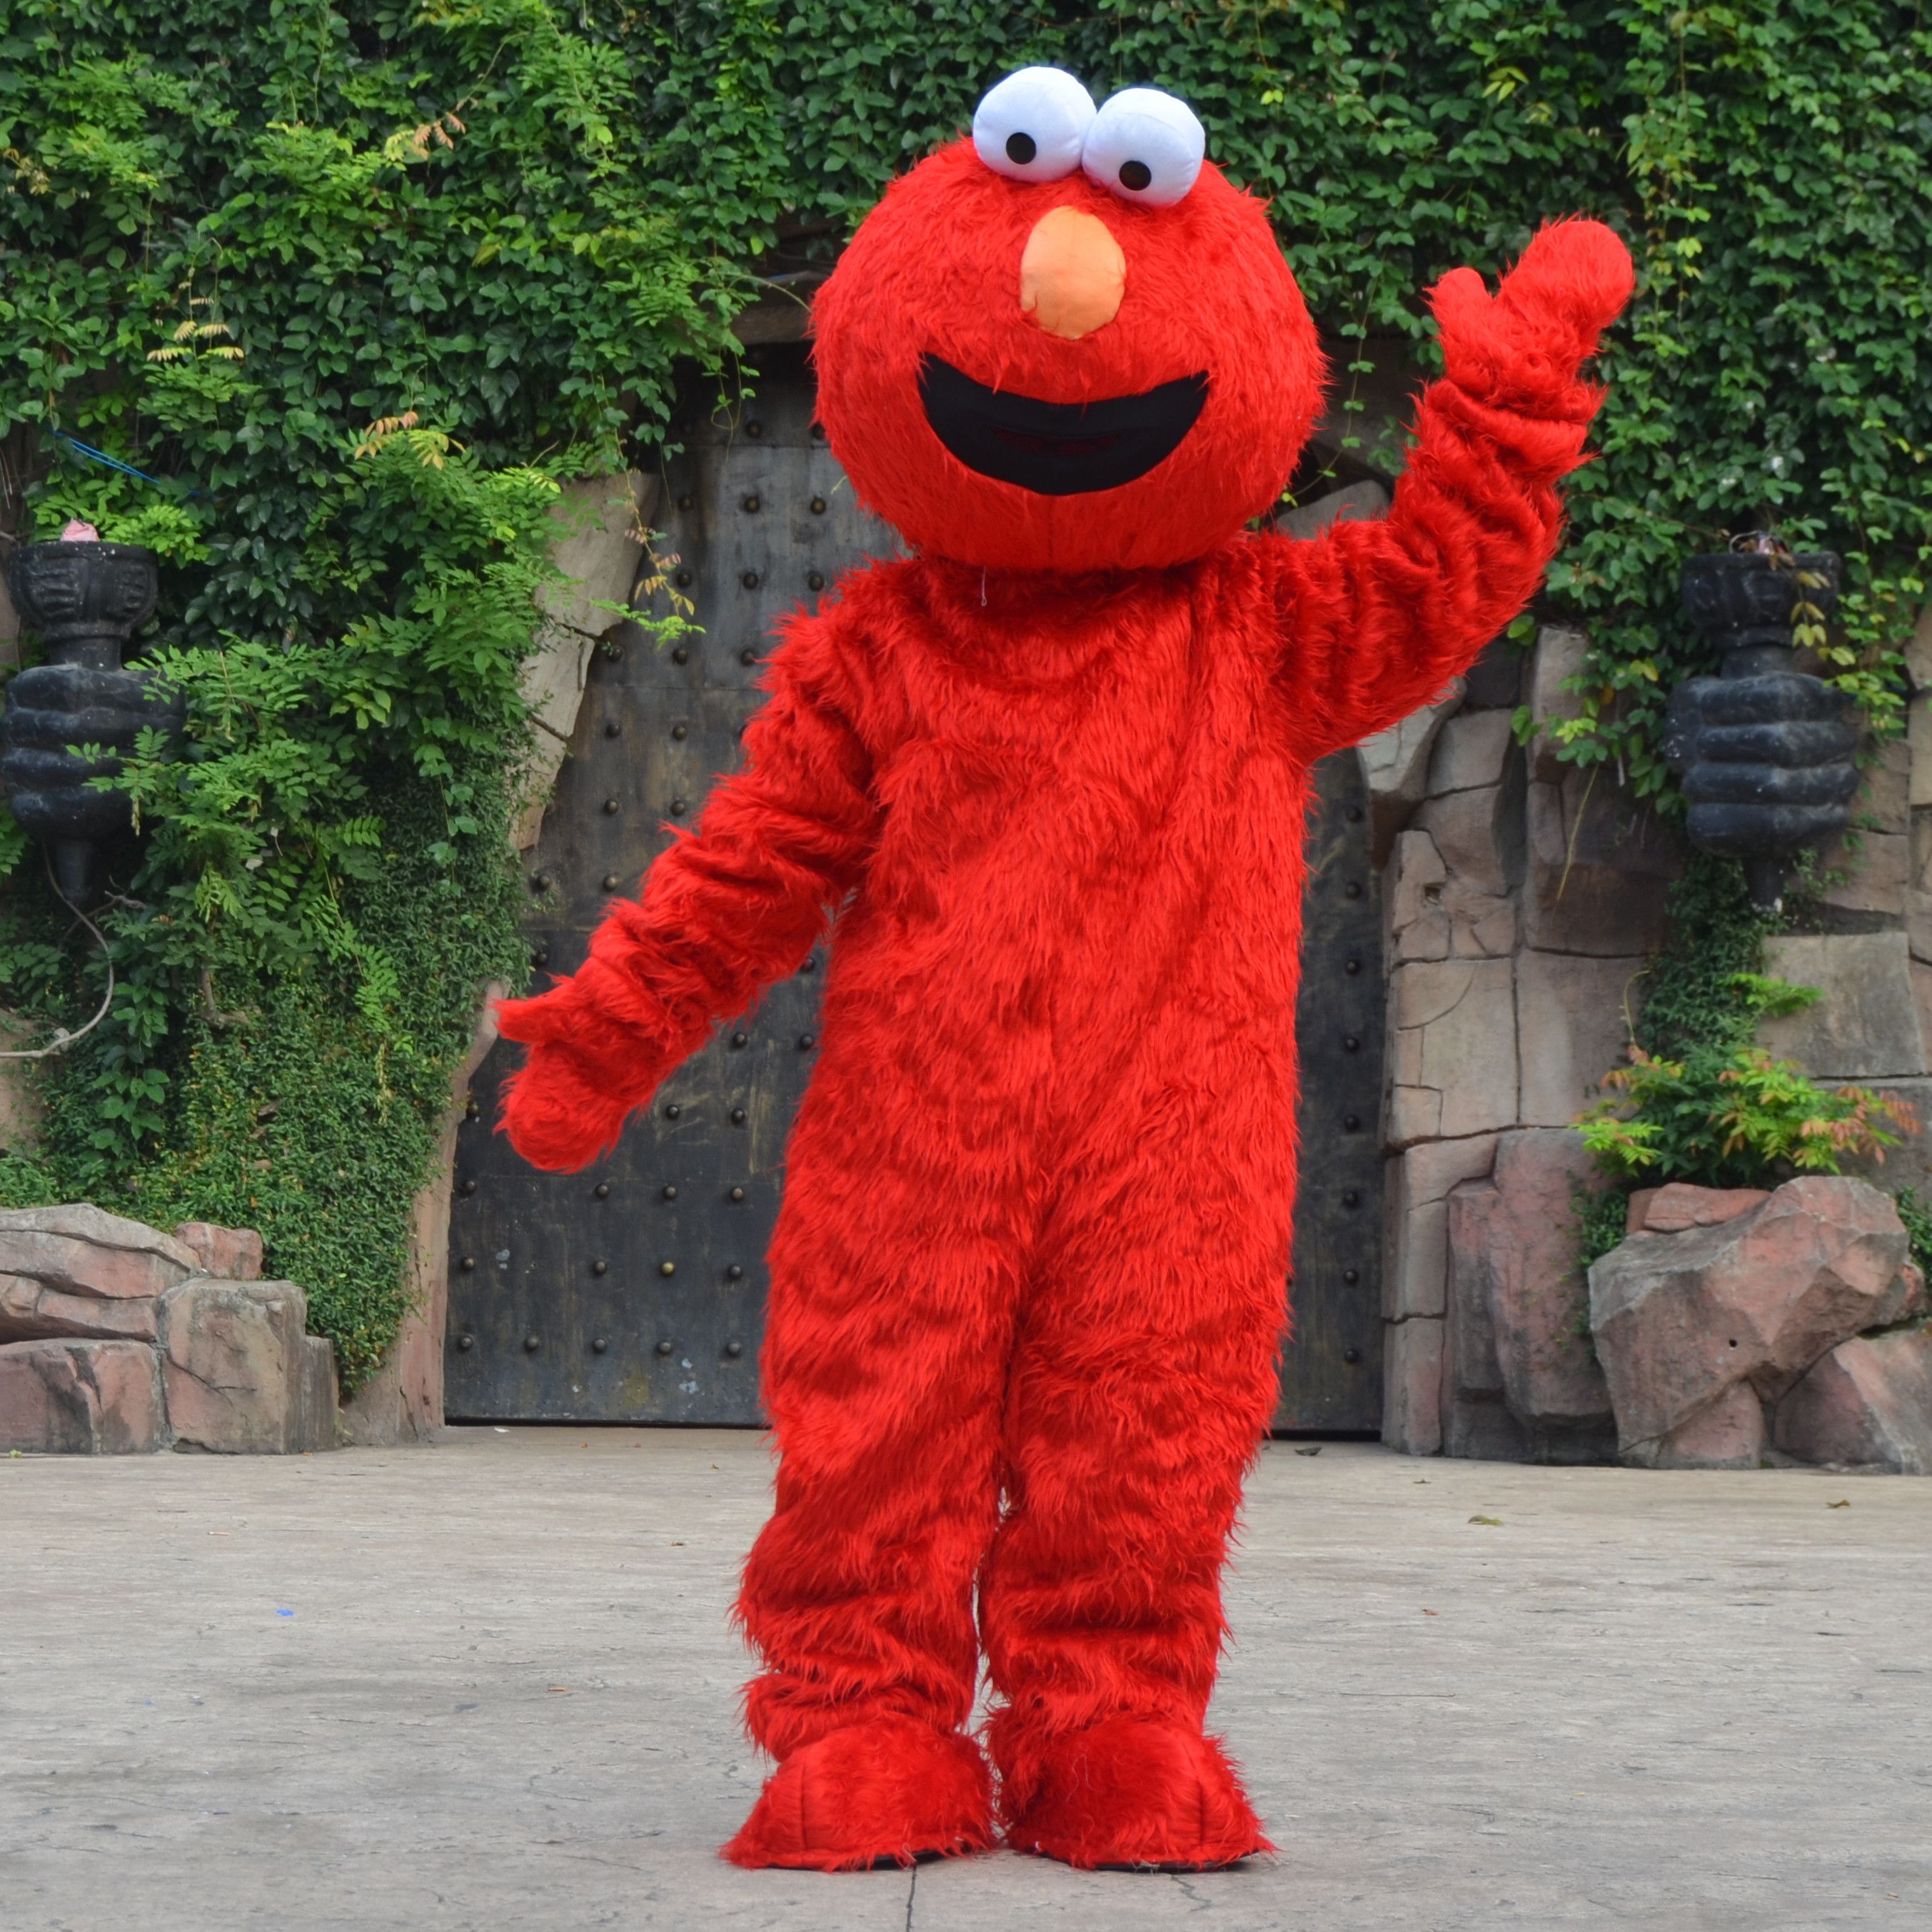 Illusion Fremtrædende gerningsmanden Adult Size Red Elmo Mascot Costume Party Costumes Chirstmas Fancy Dress Elmo  Costume Mascot Drop Shipping From Sally389, $111.68 | DHgate.Com